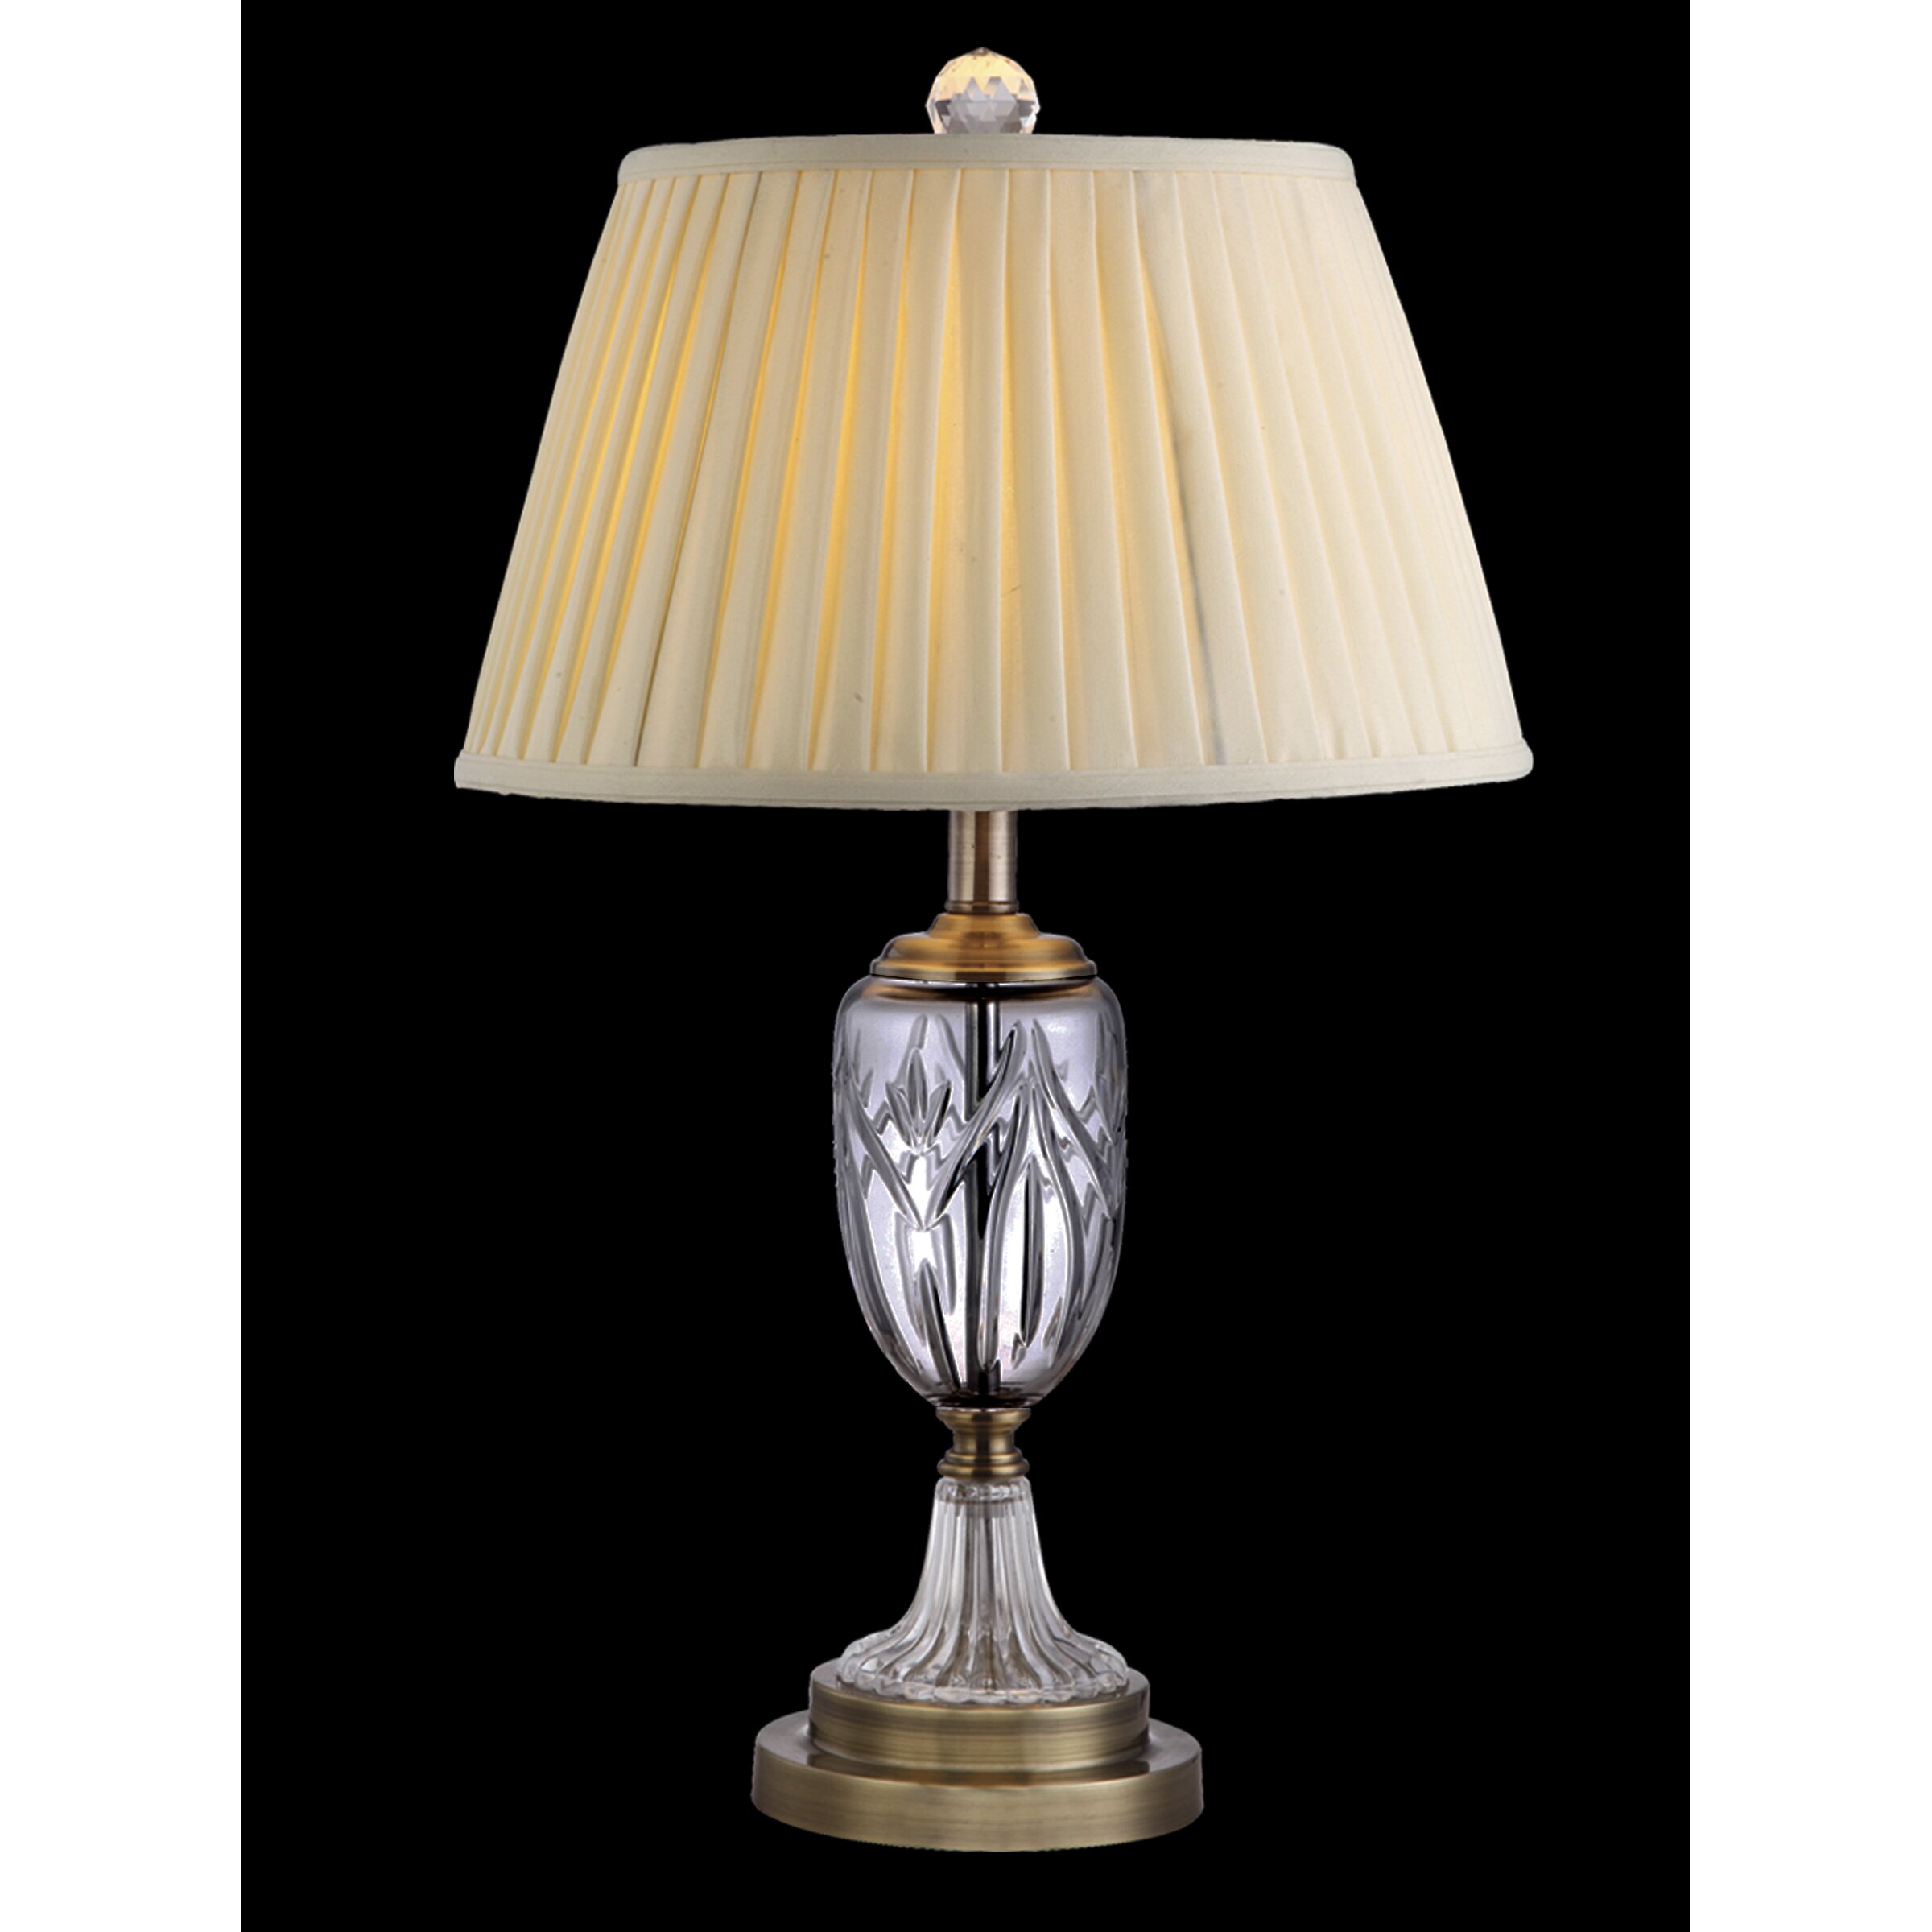 Dale Tiffany 26" Table Lamp & Reviews